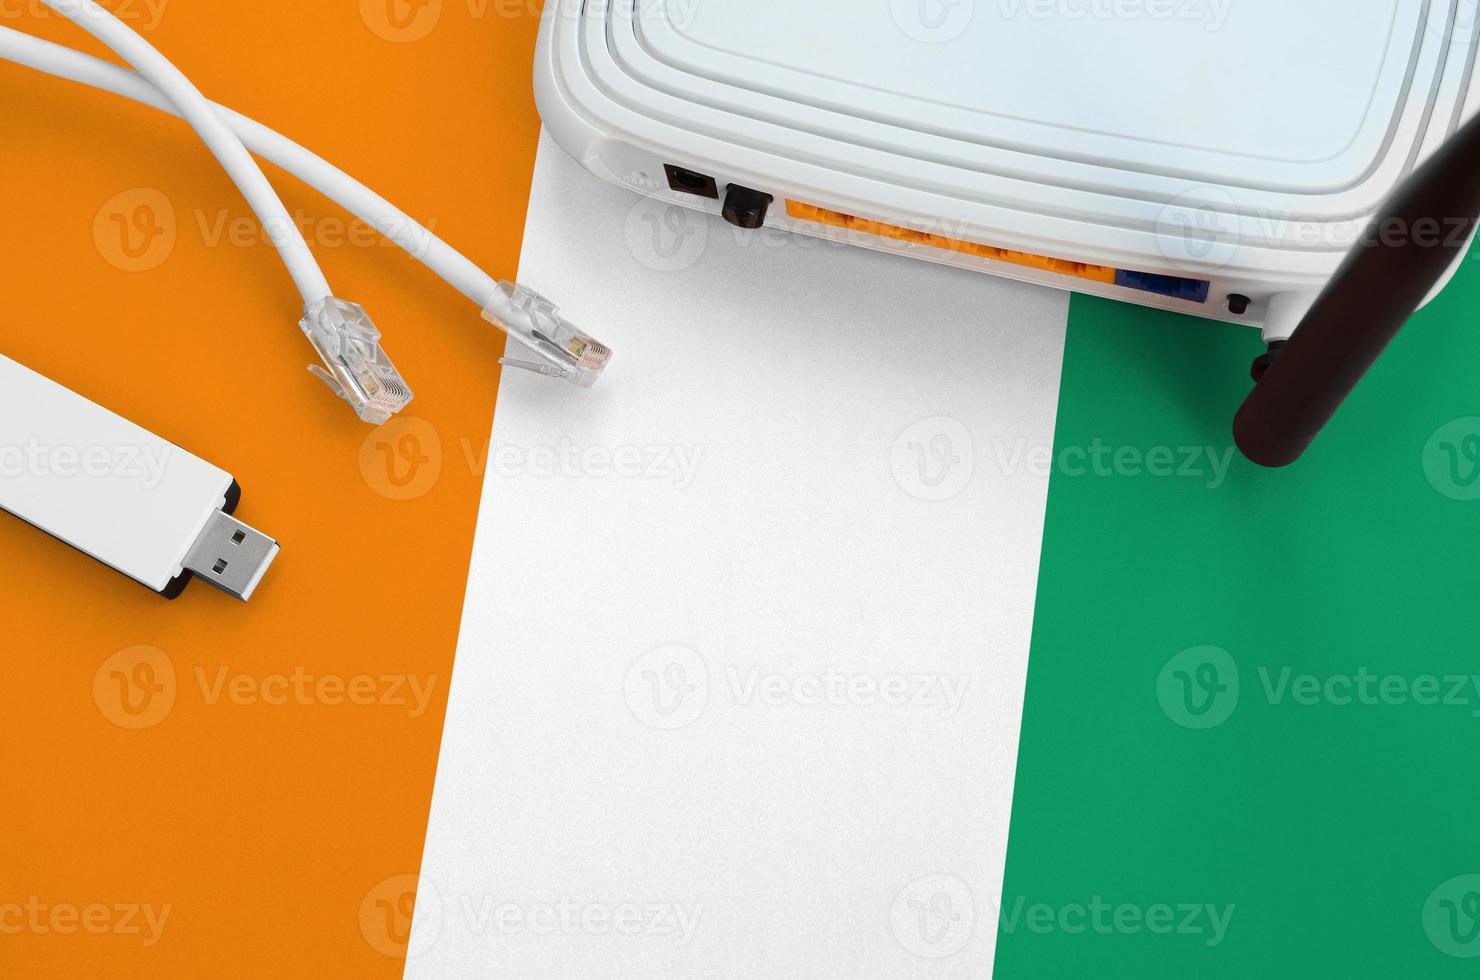 Ivory Coast flag depicted on table with internet rj45 cable, wireless usb wifi adapter and router. Internet connection concept photo